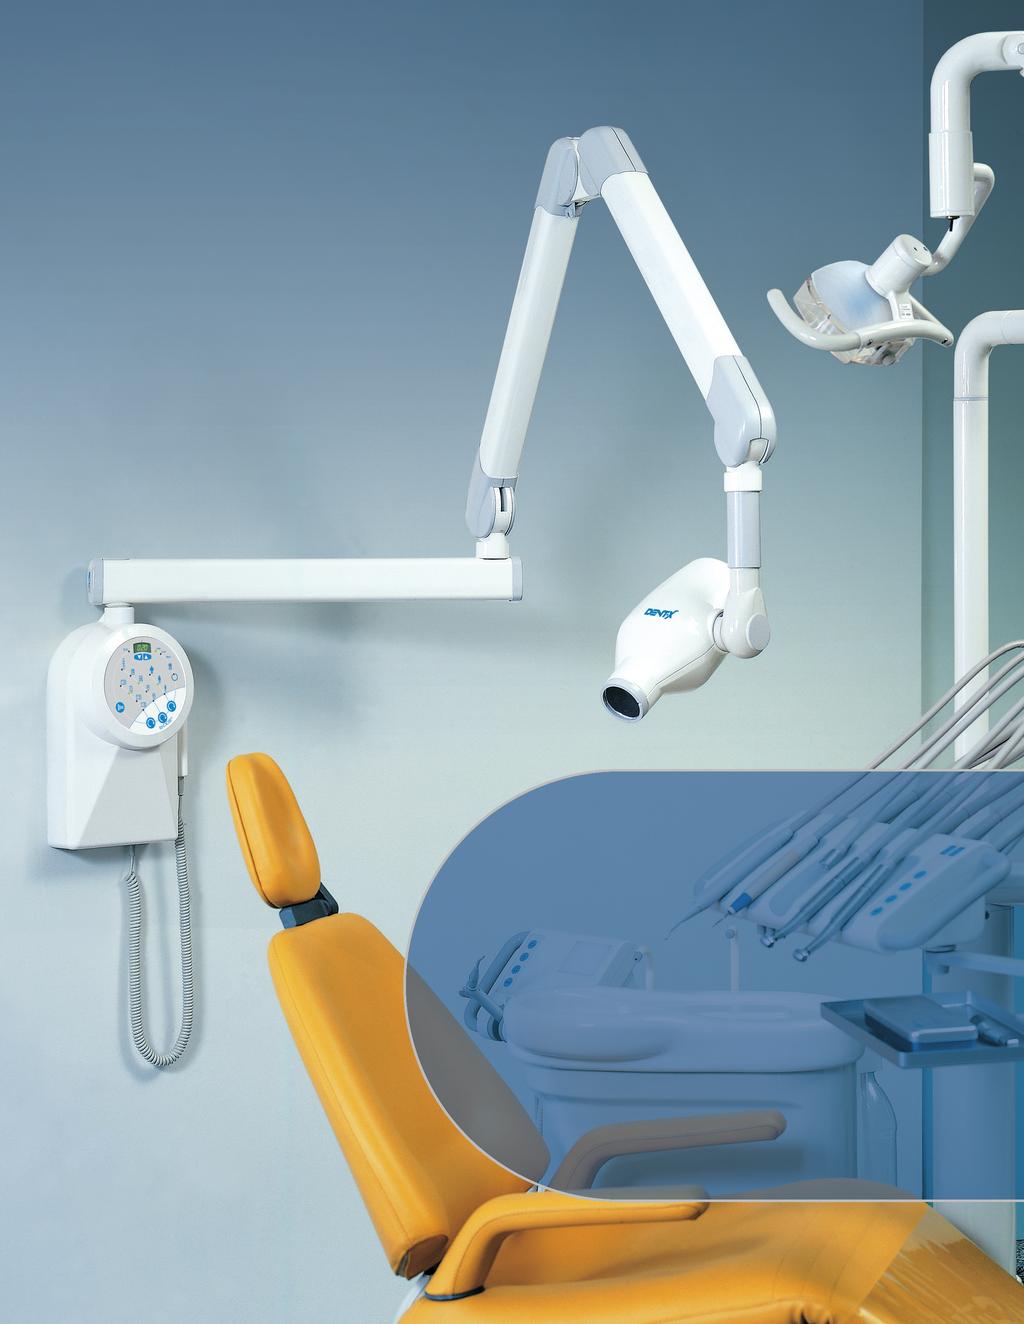 With the full line of Endos intraoral X-ray units, everything has been designed to maximize operating efficiency while allowing the dentist to concentrate on diagnosis and treatment.